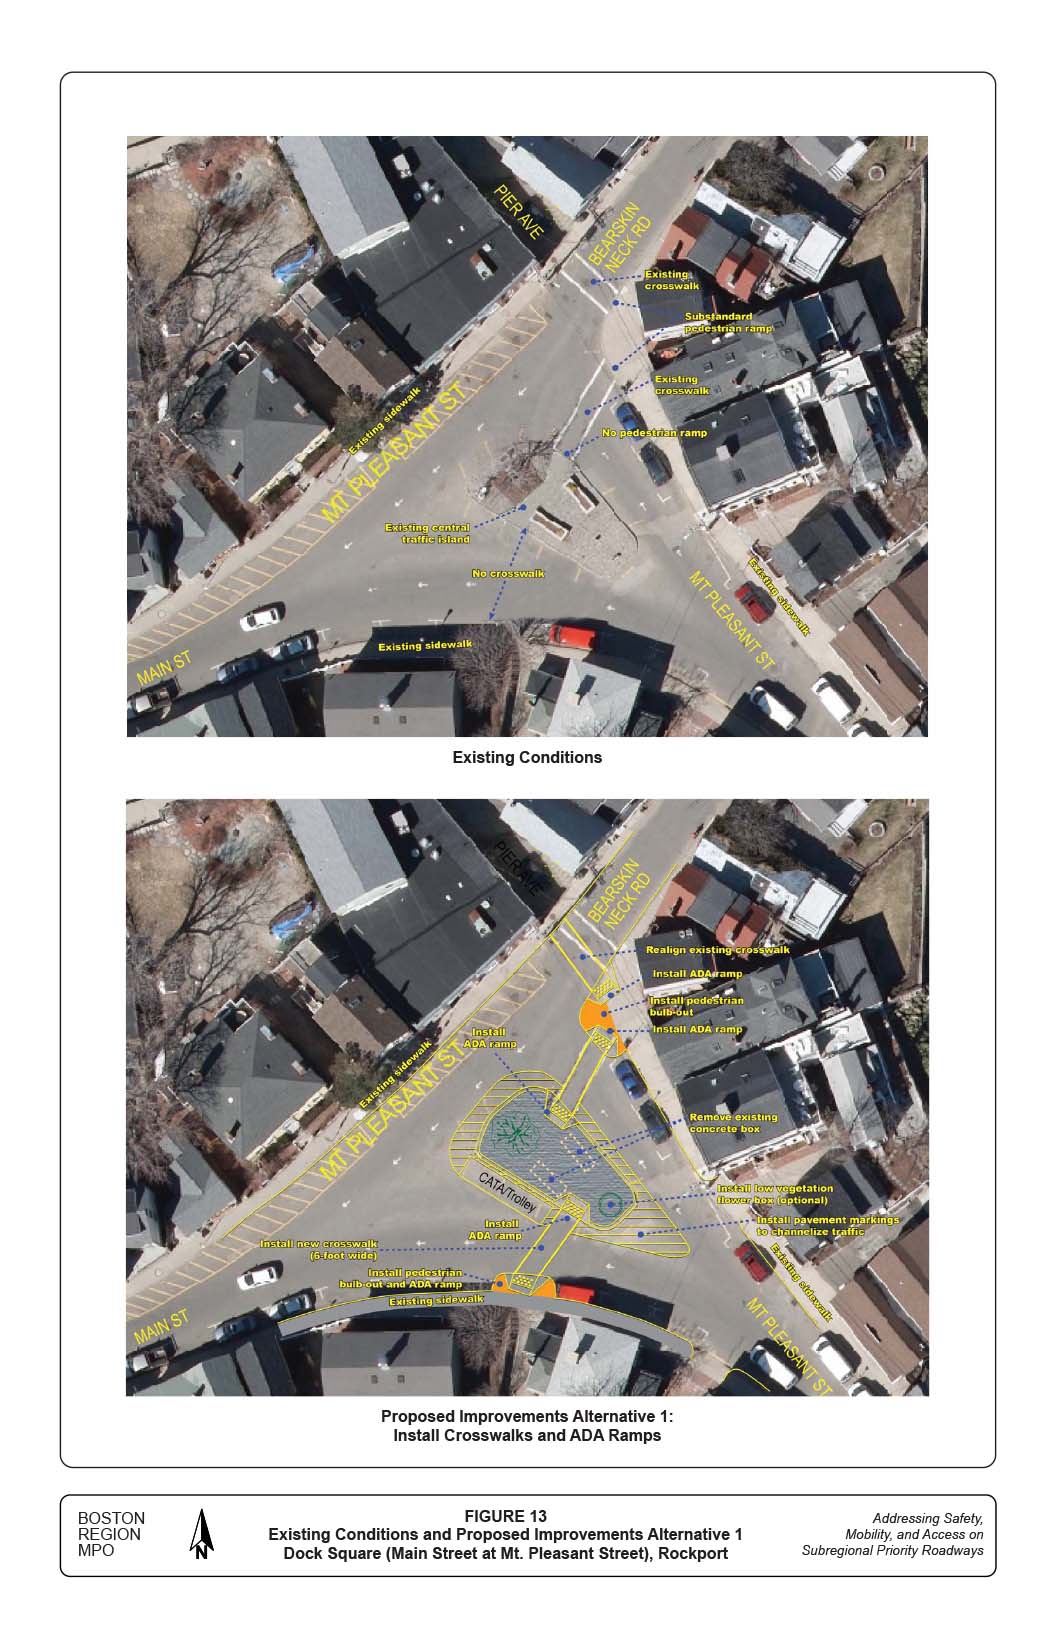 FIGURE 13. Existing Conditions and Proposed Improvements Alternative 1 Dock Square (Main Street at Mt. Pleasant Street), Rockport
This figure contains two aerial-view maps of the intersection of Dock Square (Main Street at Mt. Pleasant Street), Rockport in the study area. The maps denote, with both text and pointing arrows, the existing conditions and proposed improvements.
1)	The first image, Existing Conditions, cites (in a clock-wise direction): Existing crosswalk; substandard pedestrian ramp; no pedestrian ramp; existing sidewalk; no crosswalk; existing sidewalk; existing central traffic island; and existing sidewalk.
2)	The second image, Proposed Improvements, Alternative 1, cites (in a clock-wise direction): Realign existing crosswalk; install ADA ramp; install pedestrian bulb-out; install ADA ramp; remove existing concrete box; install low vegetation flower box (optional); install pavement markings to channelize traffic; existing sidewalk; install ADA ramp; existing sidewalk; install pedestrian bulb-out and ADA ramp; install new crosswalk (6-foot wide); existing sidewalk; install ADA ramp. 

